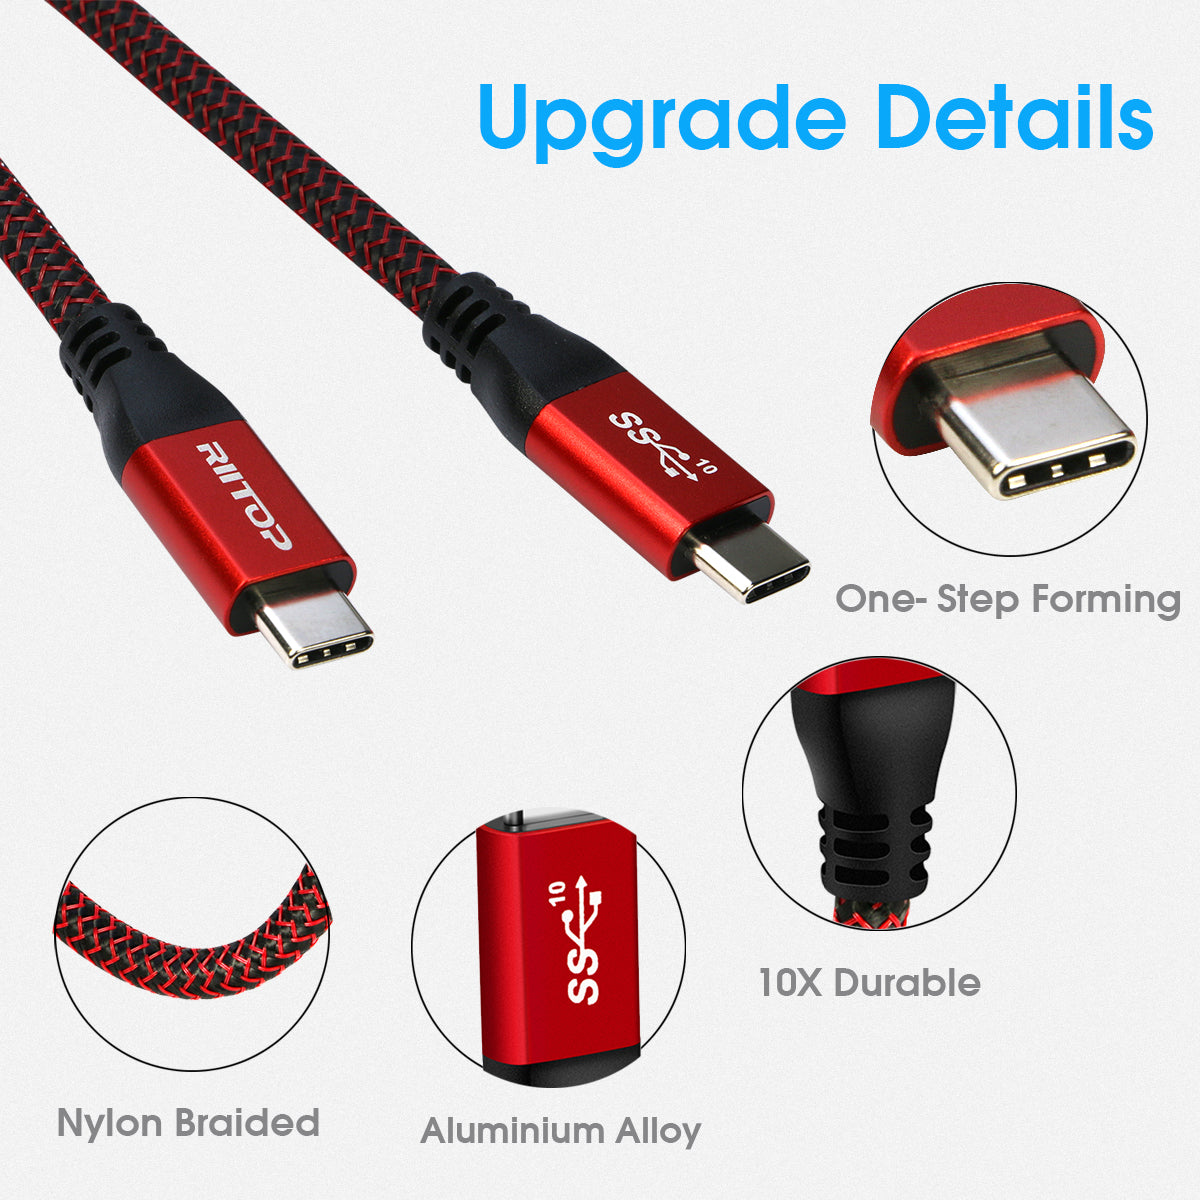 USB C To USB C 3.1 Gen 2 Cable 10Gbps Data Transfer, 4K Video